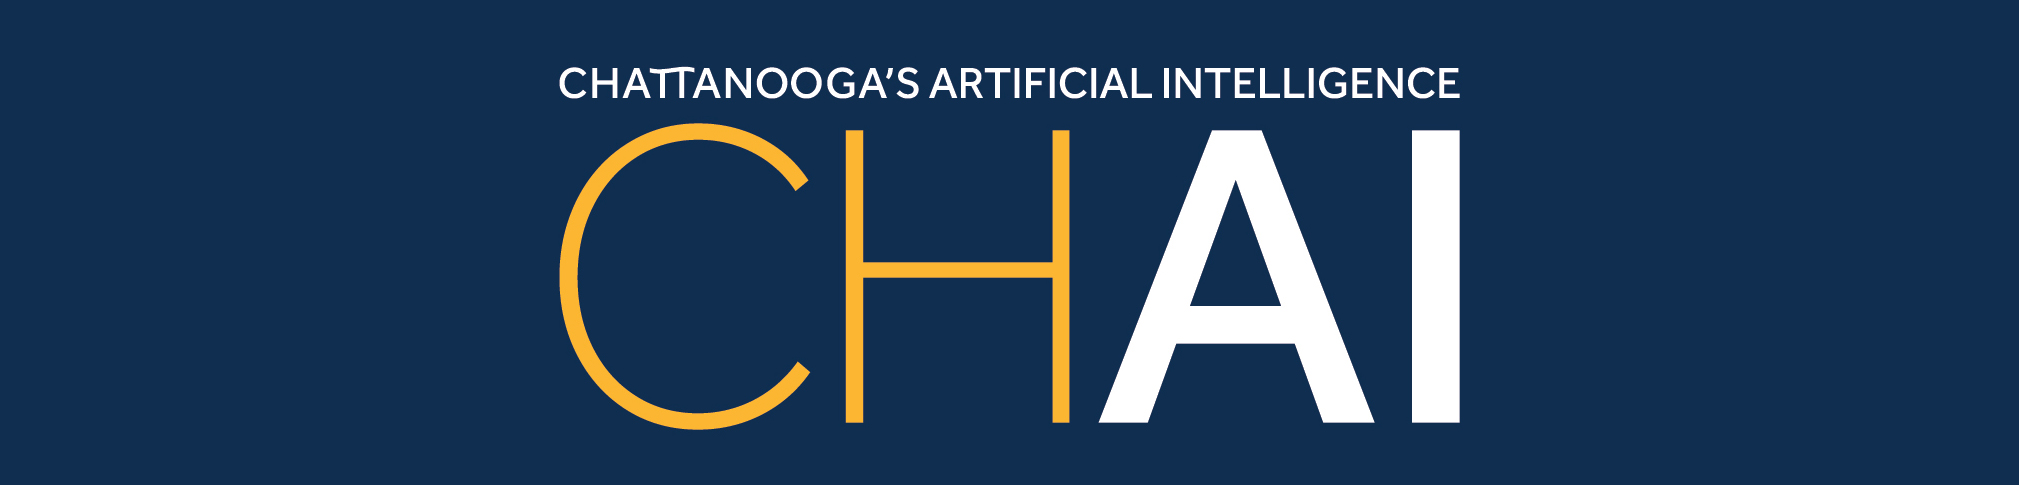 Chattanooga Artificial Intelligence